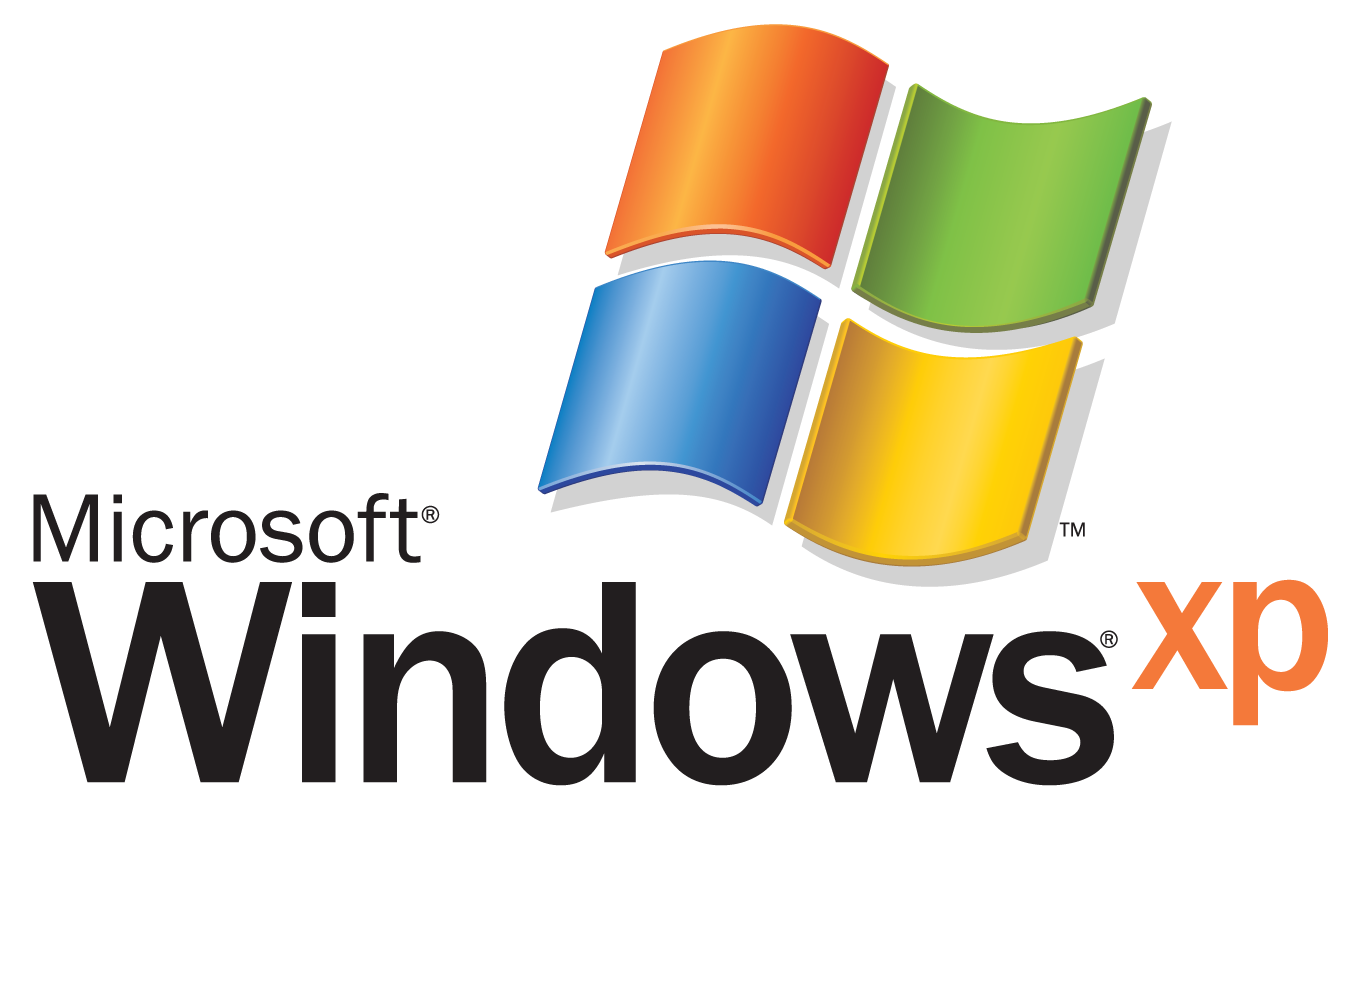 The words 'Microsoft Windows XP', with logo floating above them